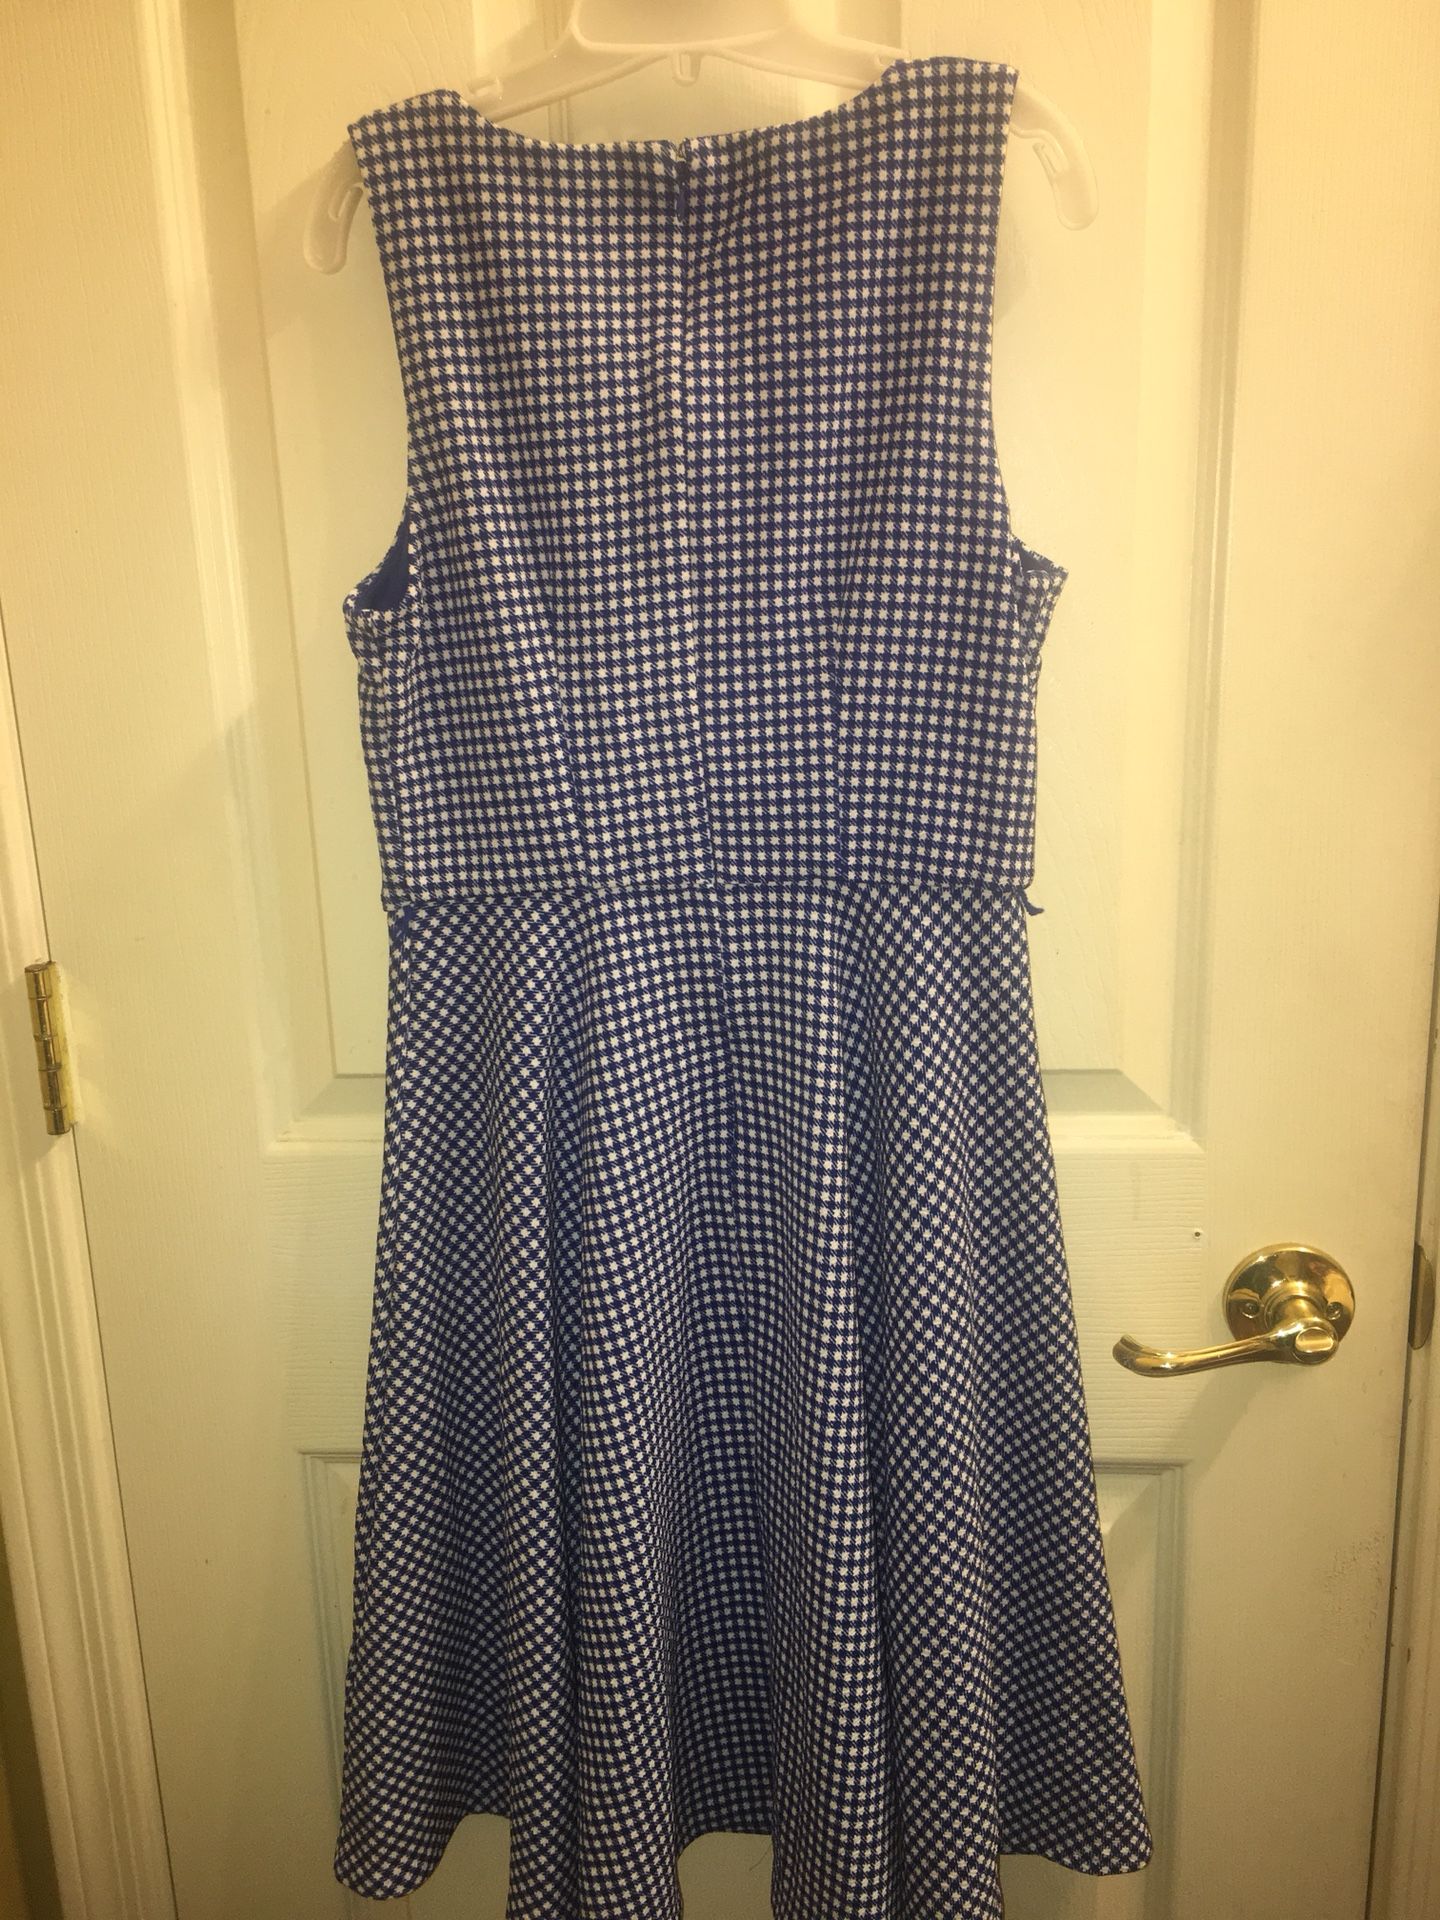 Size S ELLE Dress blue and white casual or work appropriate